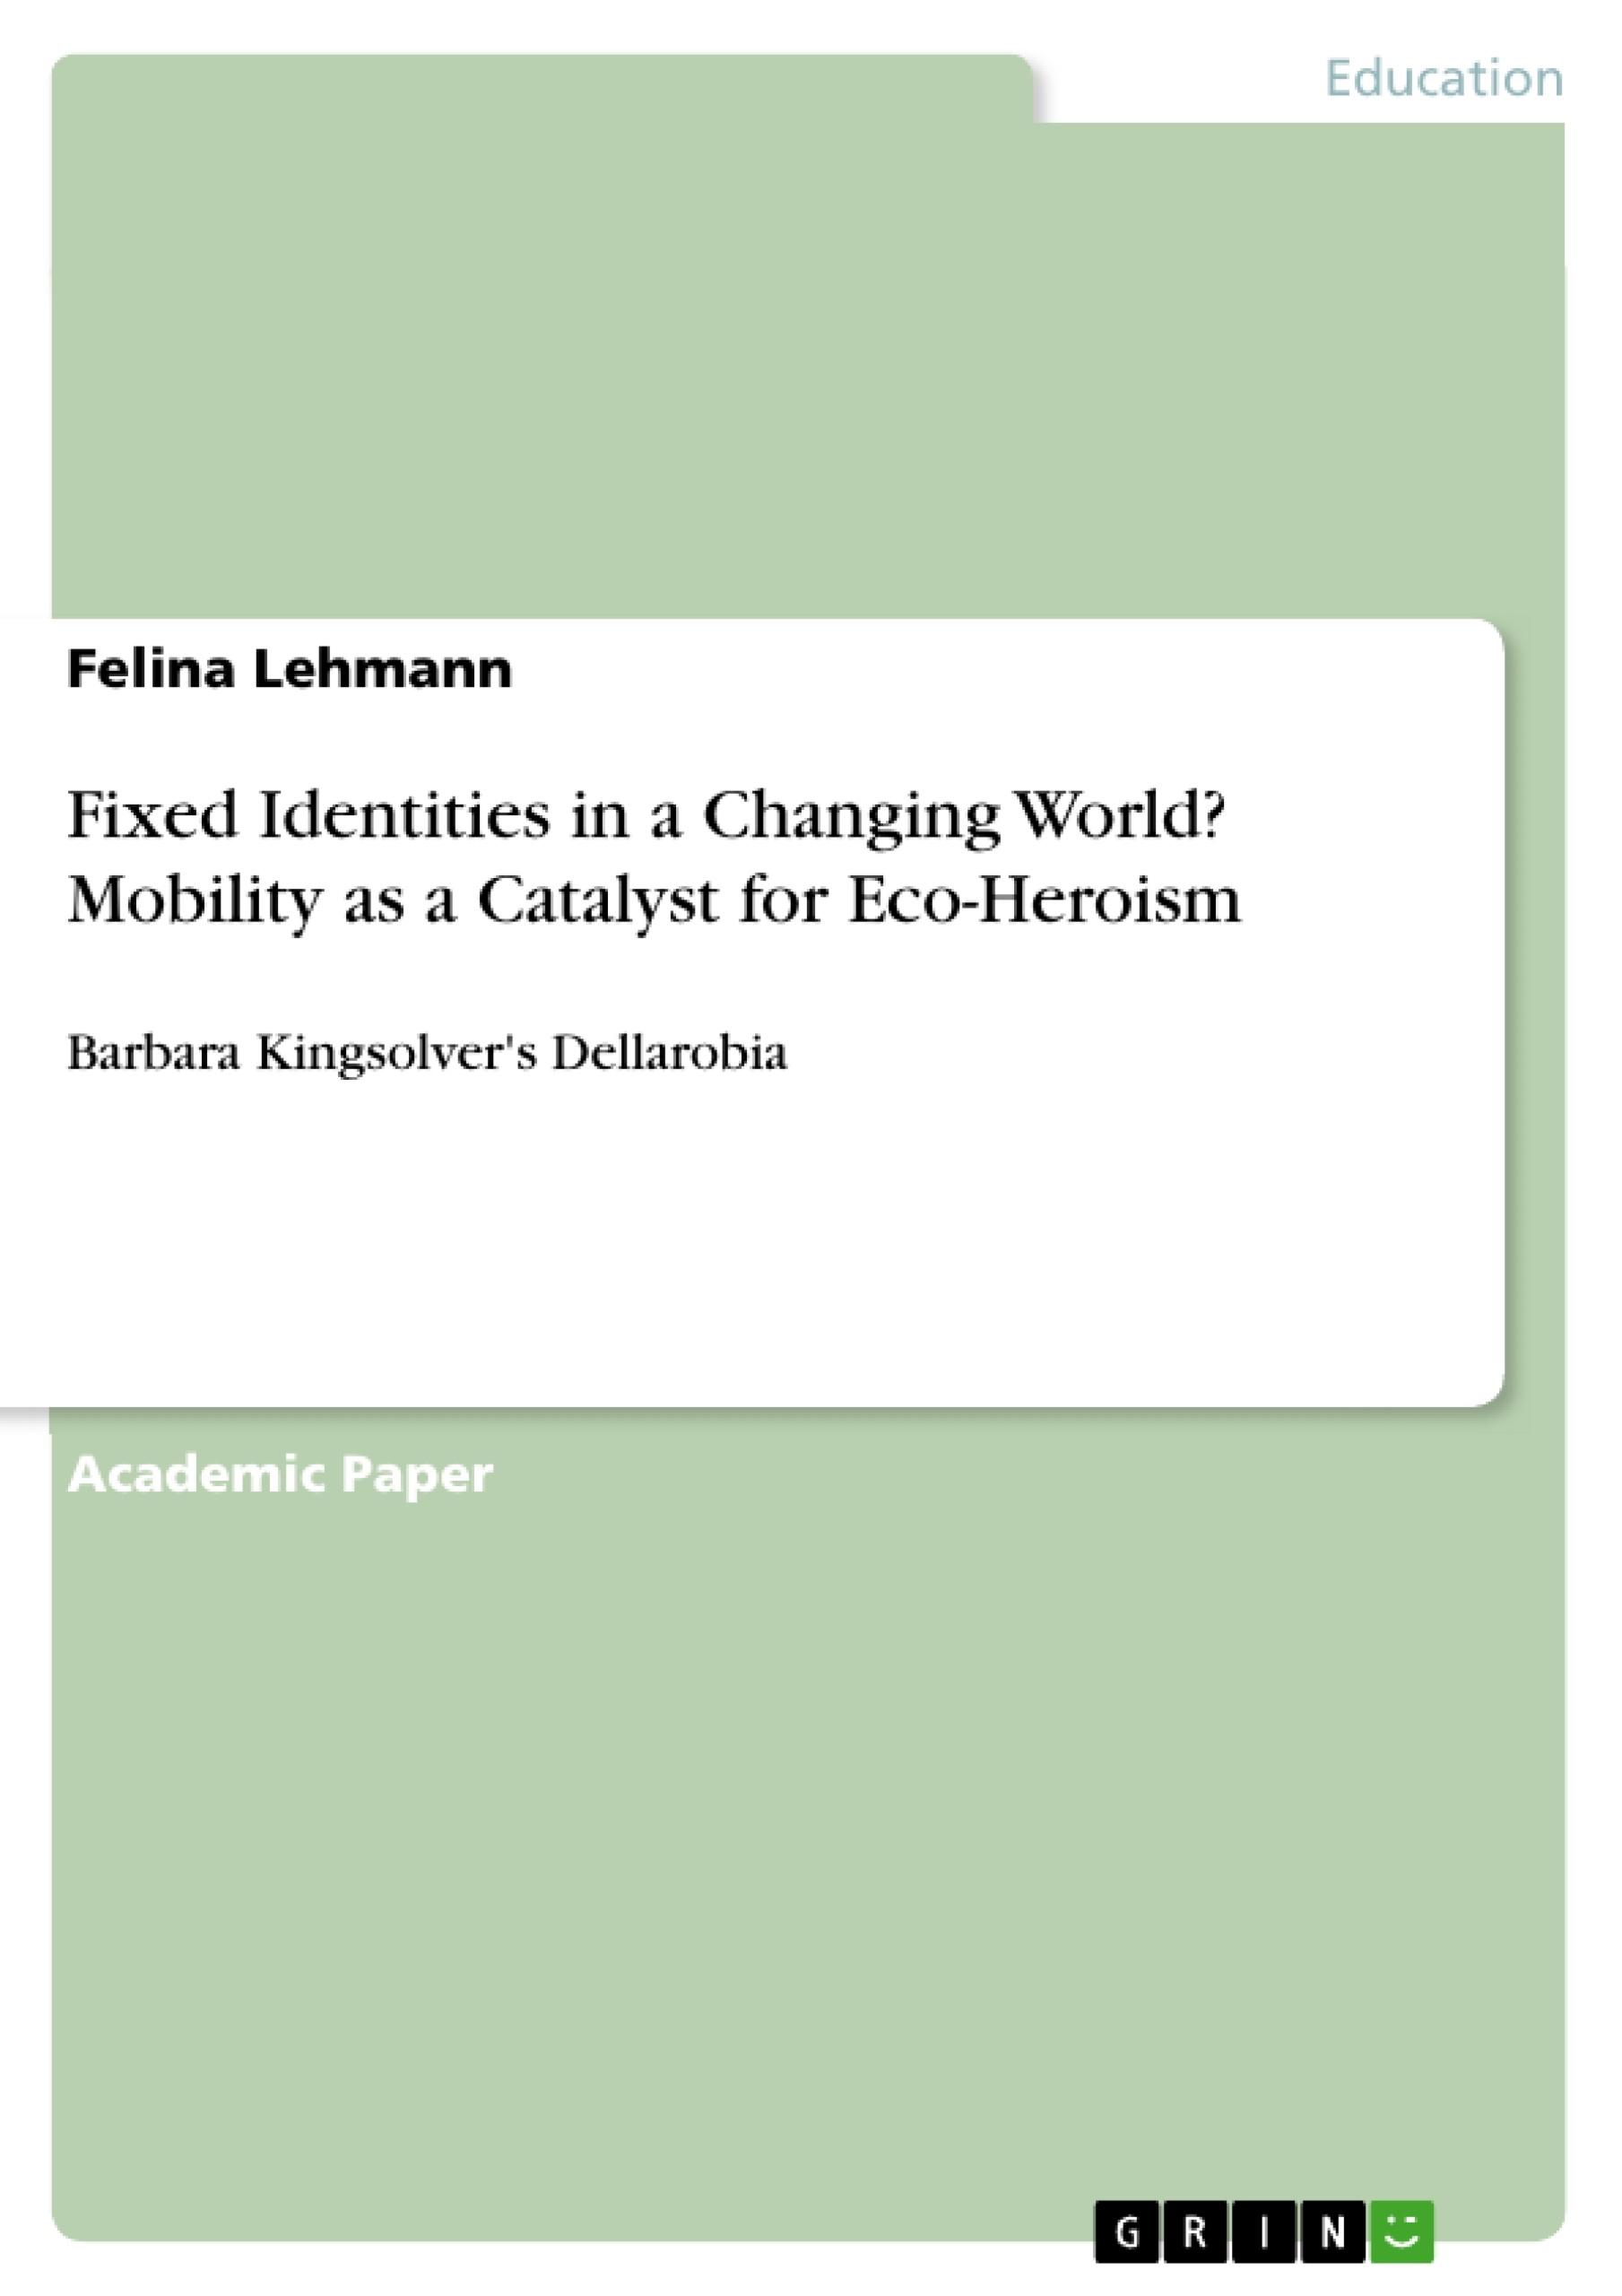 Title: Fixed Identities in a Changing World? Mobility as a Catalyst for Eco-Heroism